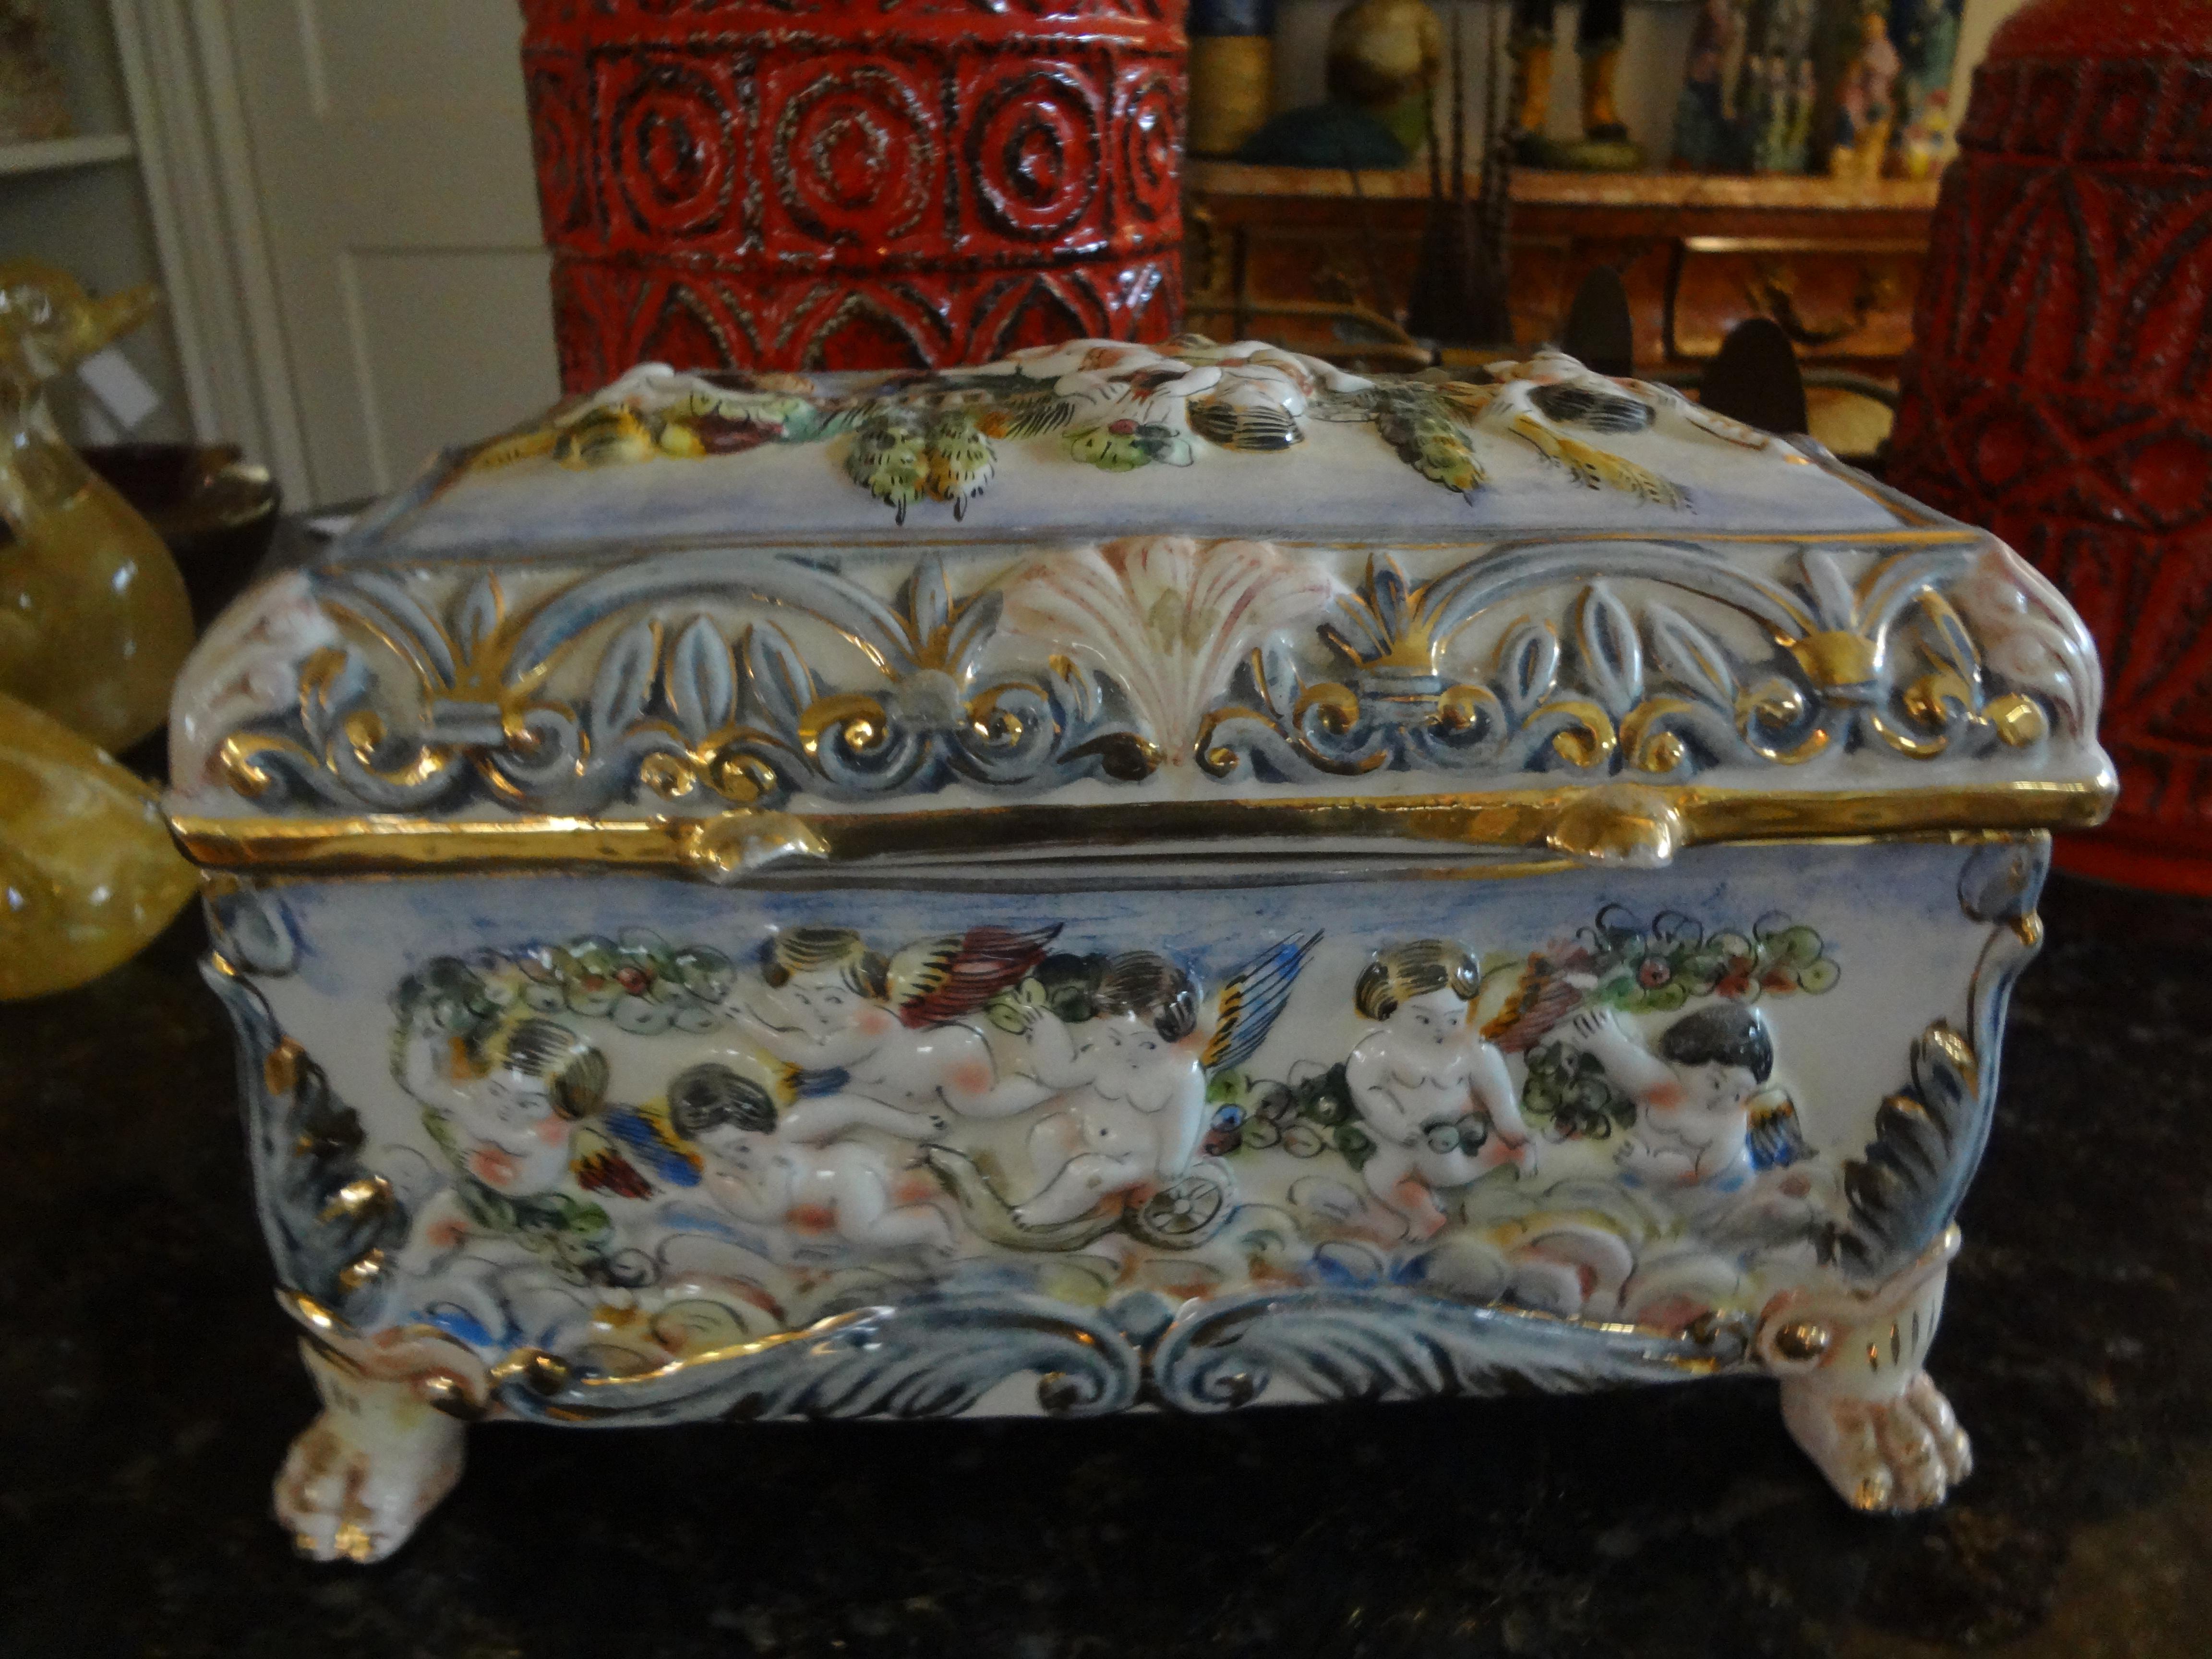 Large Vintage Italian Capodimonte Porcelain Box In Good Condition For Sale In Houston, TX